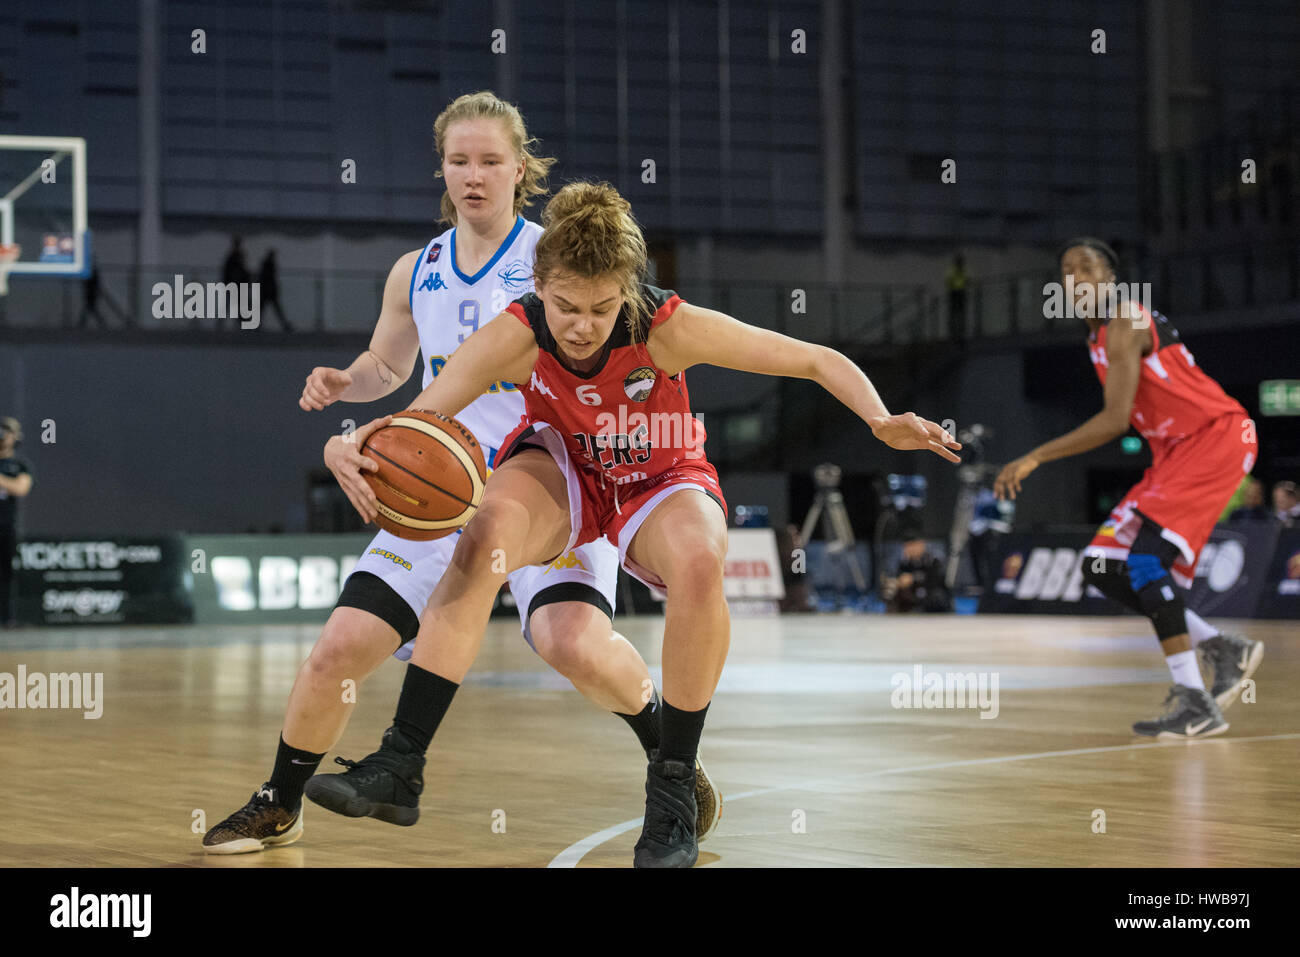 Glagow, UK, 19 March 2017.  The WBBL Cup Final between Leicester Riders vs Sevenoaks Sun held in the Emirate, Leicester Riders Holly Winterburn (6) of grabs the ball during the game. ©pmgimaging/Alamy Live News Stock Photo